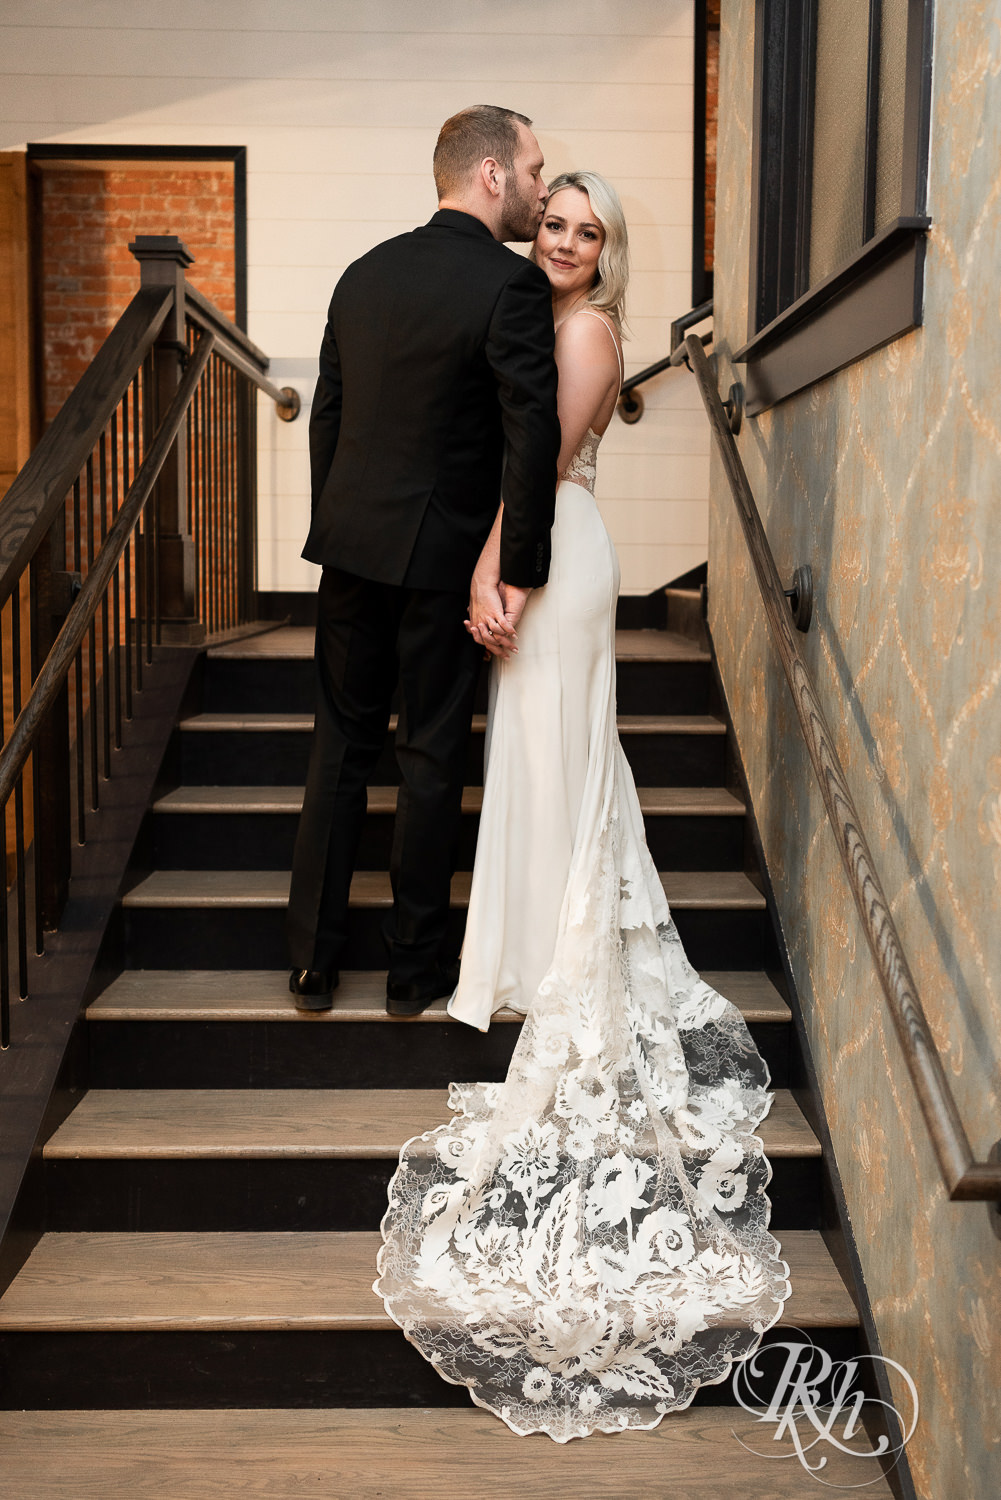 Bride and groom kissing on stairs at 3 Ten Event Venue in Faribault, Minnesota.